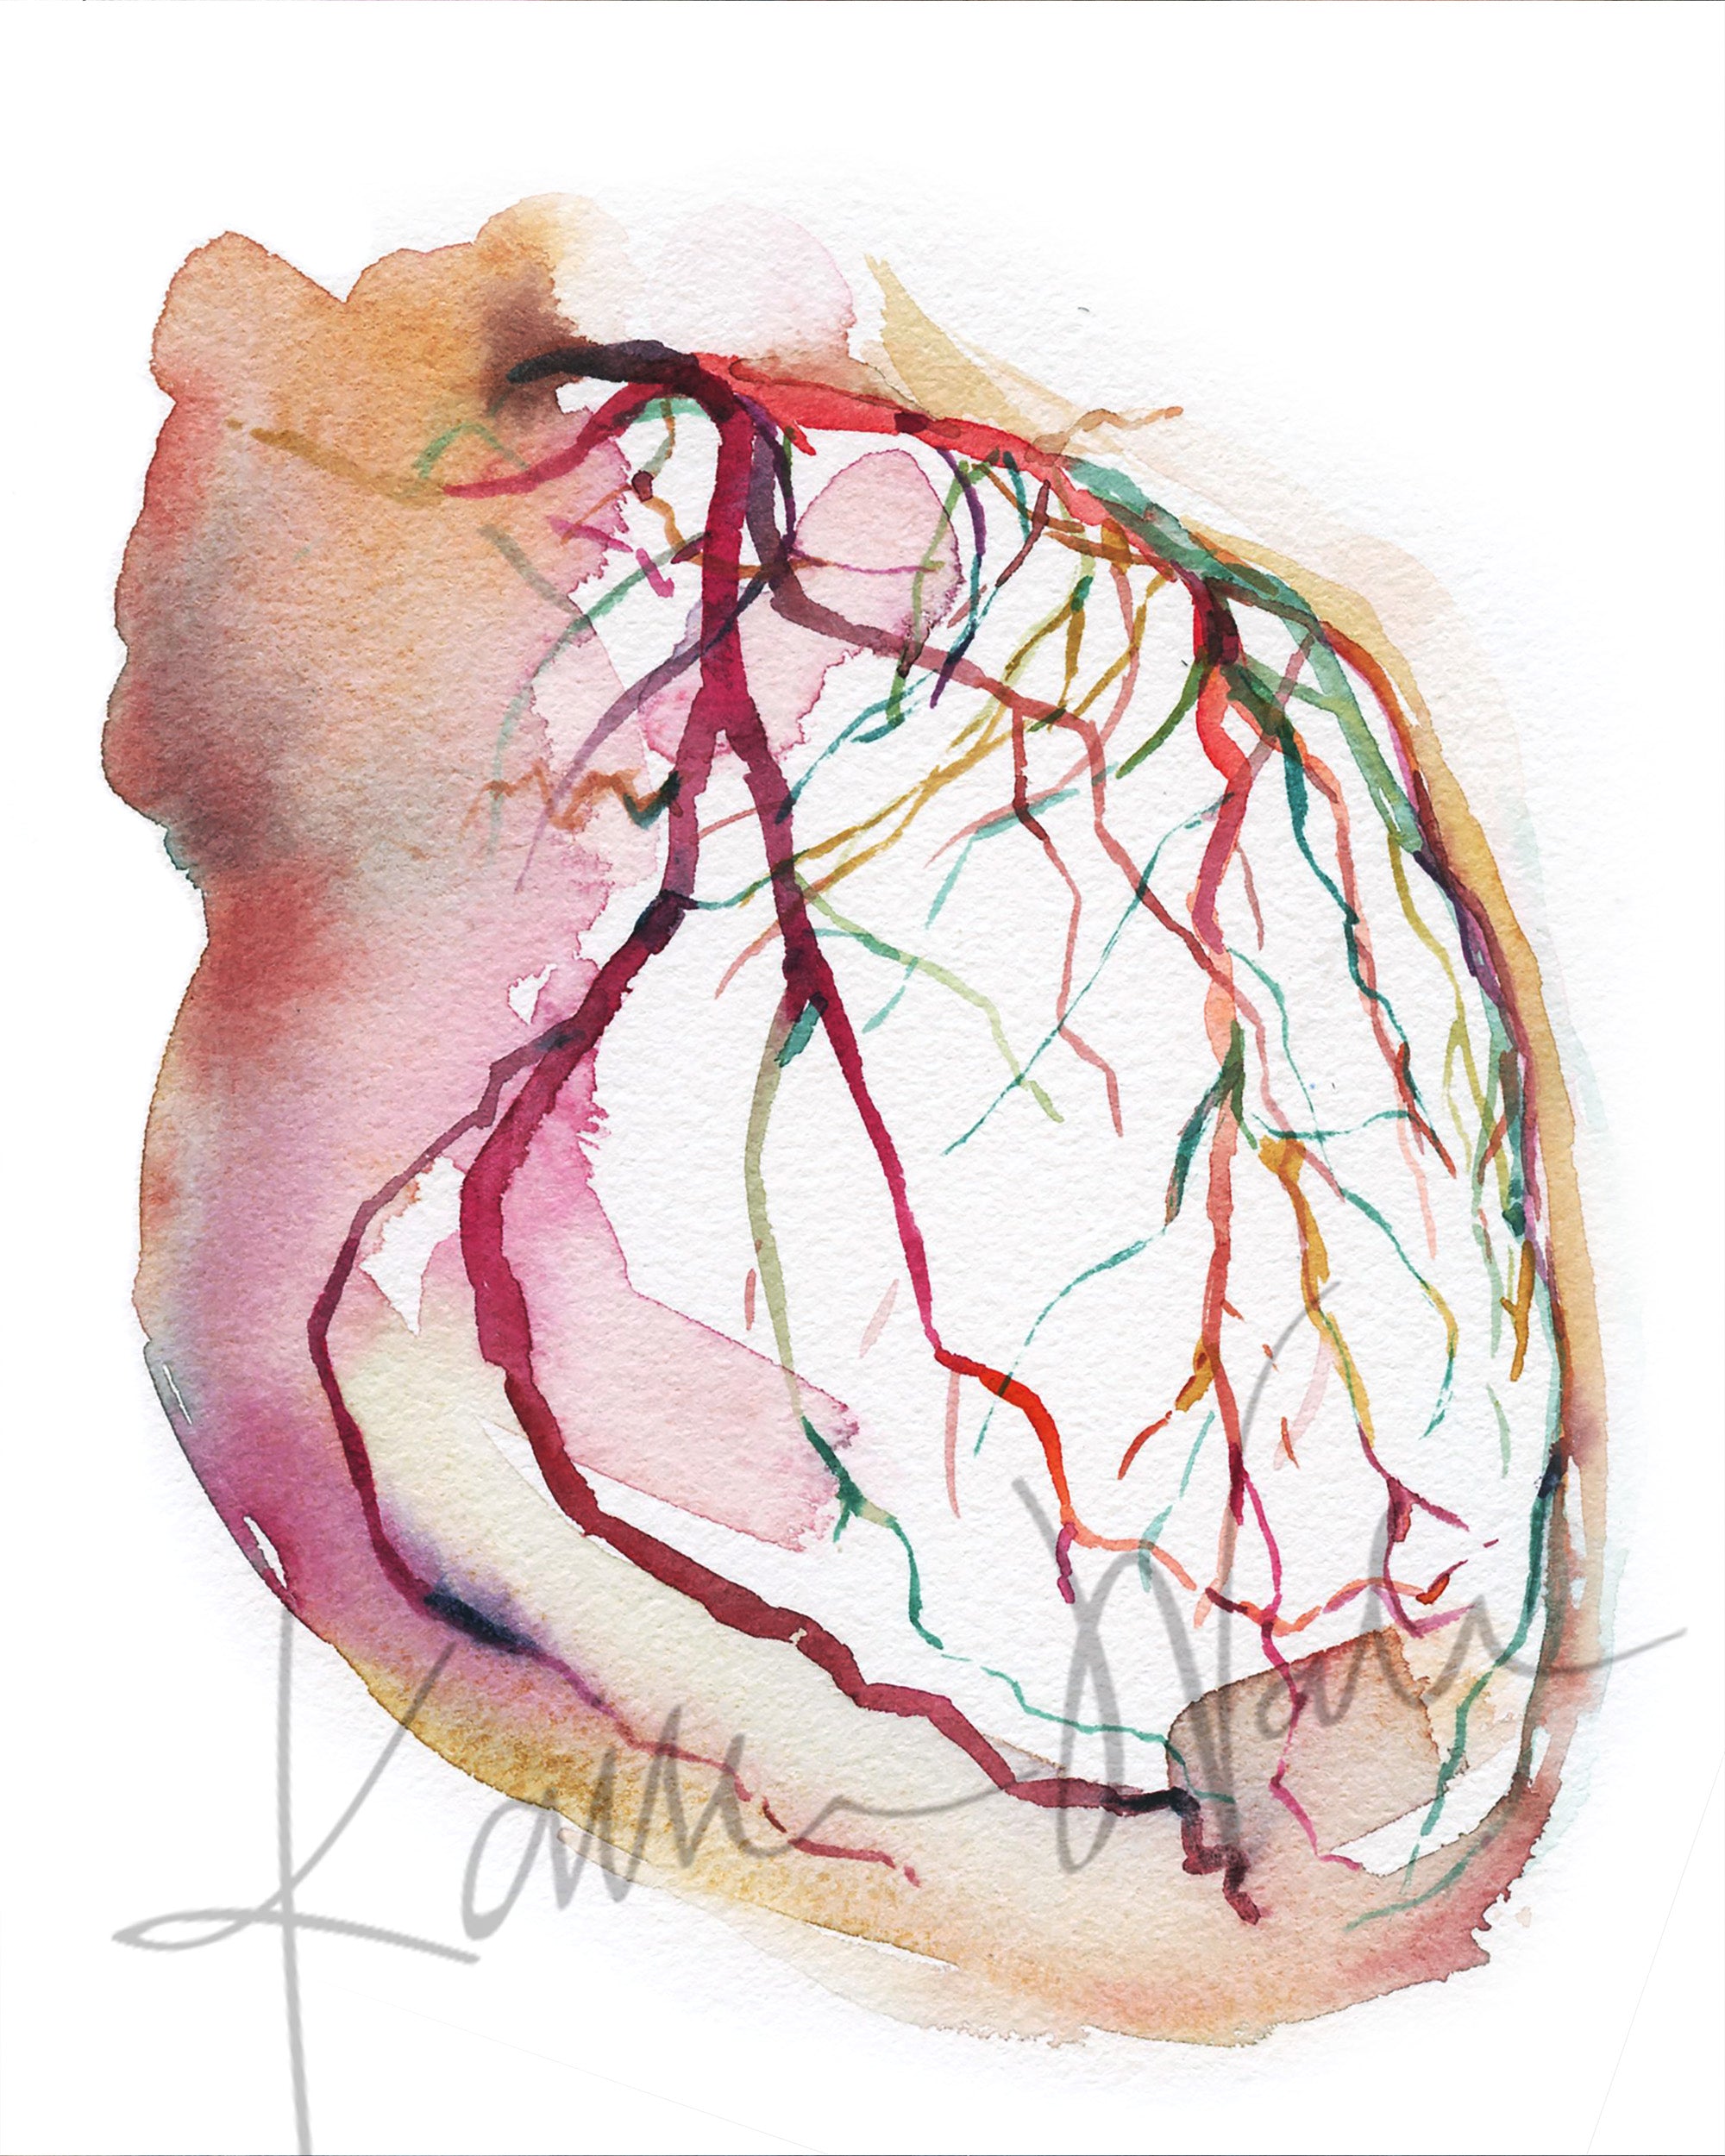  Unframed watercolor painting showing a coronary angiogram x-ray image in reds, purples, greens, oranges and yellows